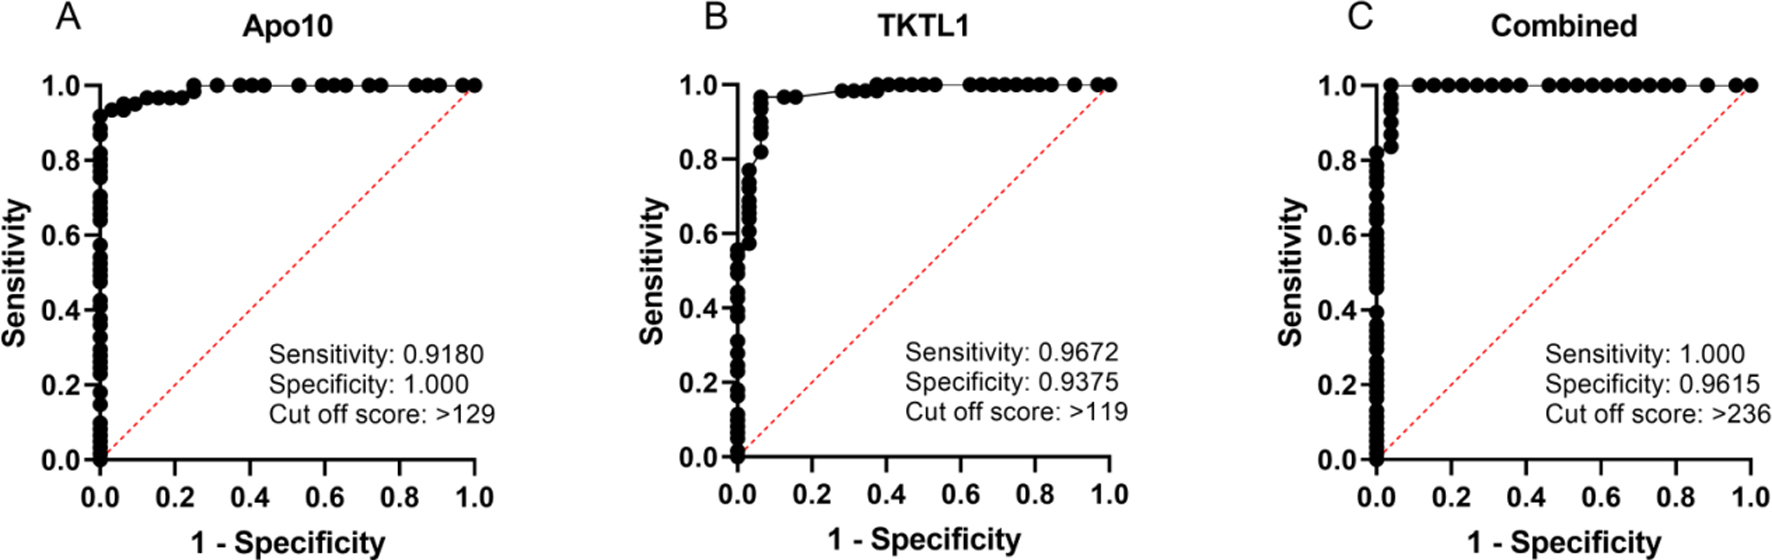 Receiver Operating Characteristics (ROC) analysis of EDIM-Apo10, EDIM-TKTL1, and combined EDIM score in pancreatic carcinoma, colorectal carcinoma, and cholangiocellular carcinoma (n= 62) compared with healthy individuals and patient with inflammation (n= 42). The true positive rates (sensitivity) are plotted as a function of the false positive rate (1 – specificity) for measuring the cut off point; ROC analysis for the diagnosis of pancreatic carcinoma, colorectal carcinoma, and cholangiocellular carcinoma (as GI tumors) shows calculated cut off values with highest diagnostic accuracy of EDIM-Apo10 (cut-off score > 129; sensitivity 0.9180, 95% CI 0.8221–0.9645; specificity 1.000, 95% CI 0.8928–1.000), EDIM TKTL1 (cut-off score > 119; sensitivity 0.9672, 95% CI 0.8881–0.9942; specificity 0.9375, 95% CI 0.7985–0.9889), and combined EDIM (cut-off score > 236; sensitivity 1.000, 95% CI 0.9408–1.000; specificity 0.9615, 95% CI 0.8111–0.9980). Dotted lines show 95% CI.